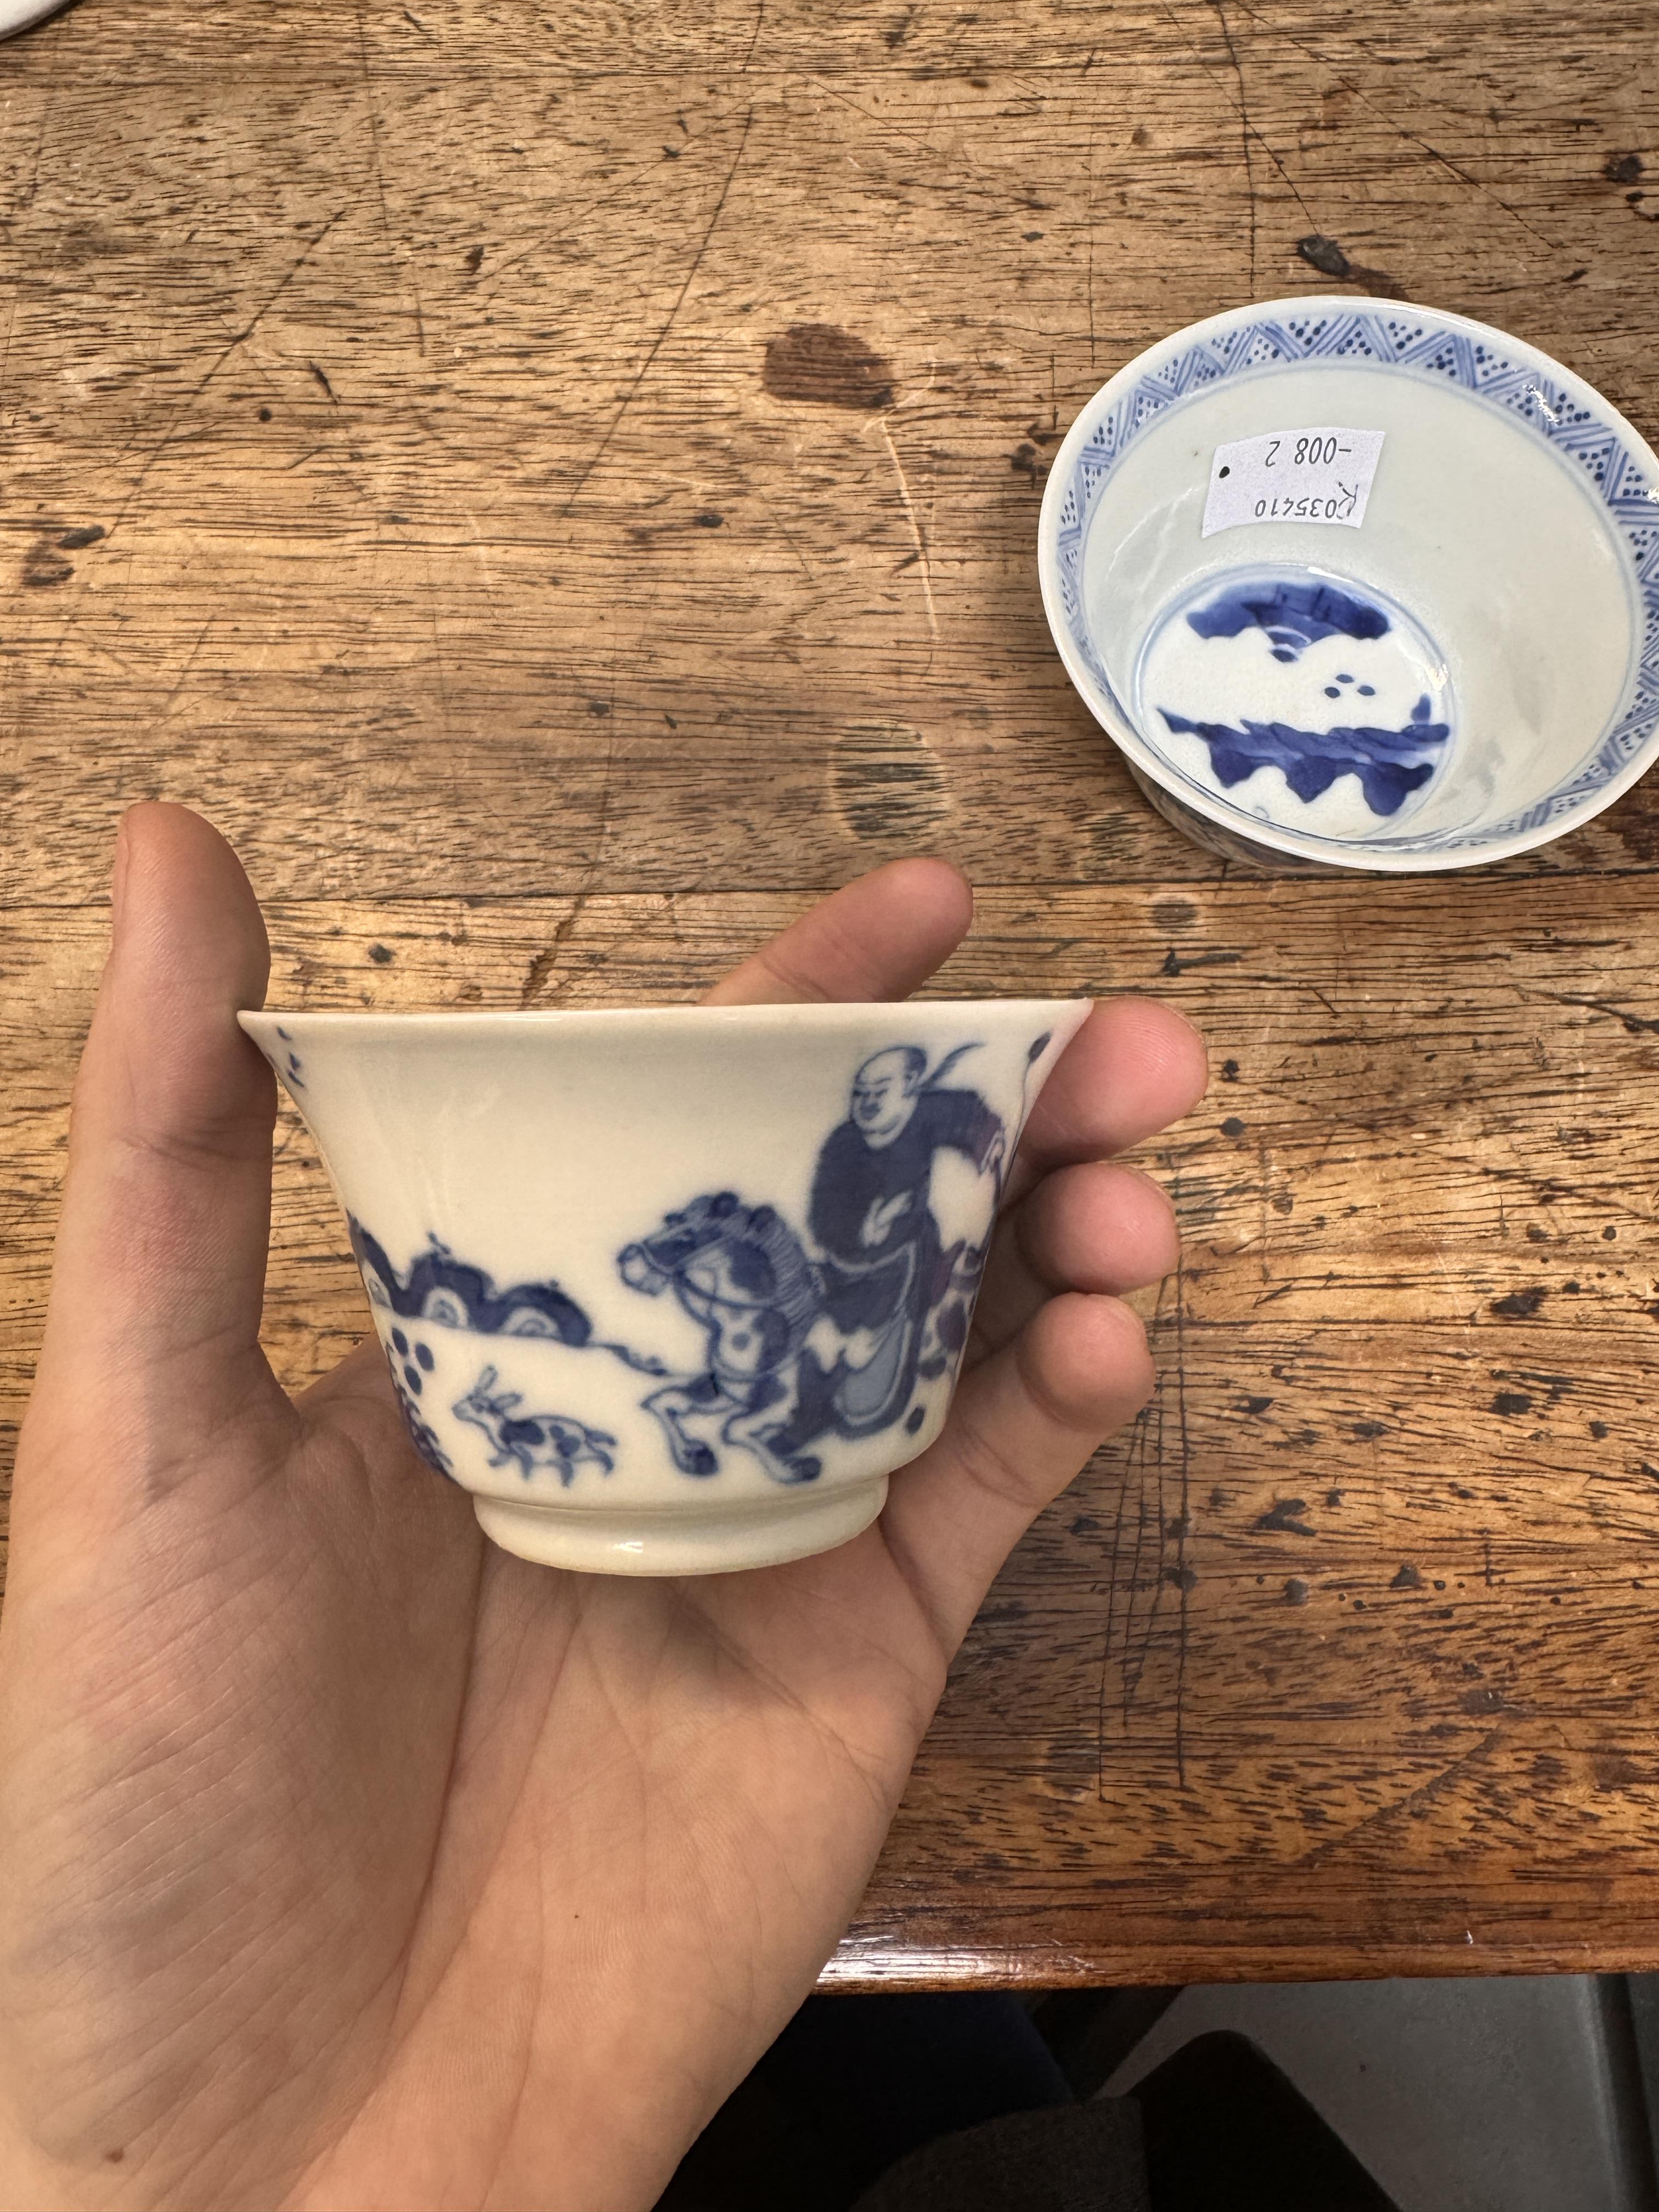 TWO CHINESE BLUE AND WHITE CUPS 清康熙 青花策馬勇戰圖盃兩件 《玉》款 - Image 21 of 23